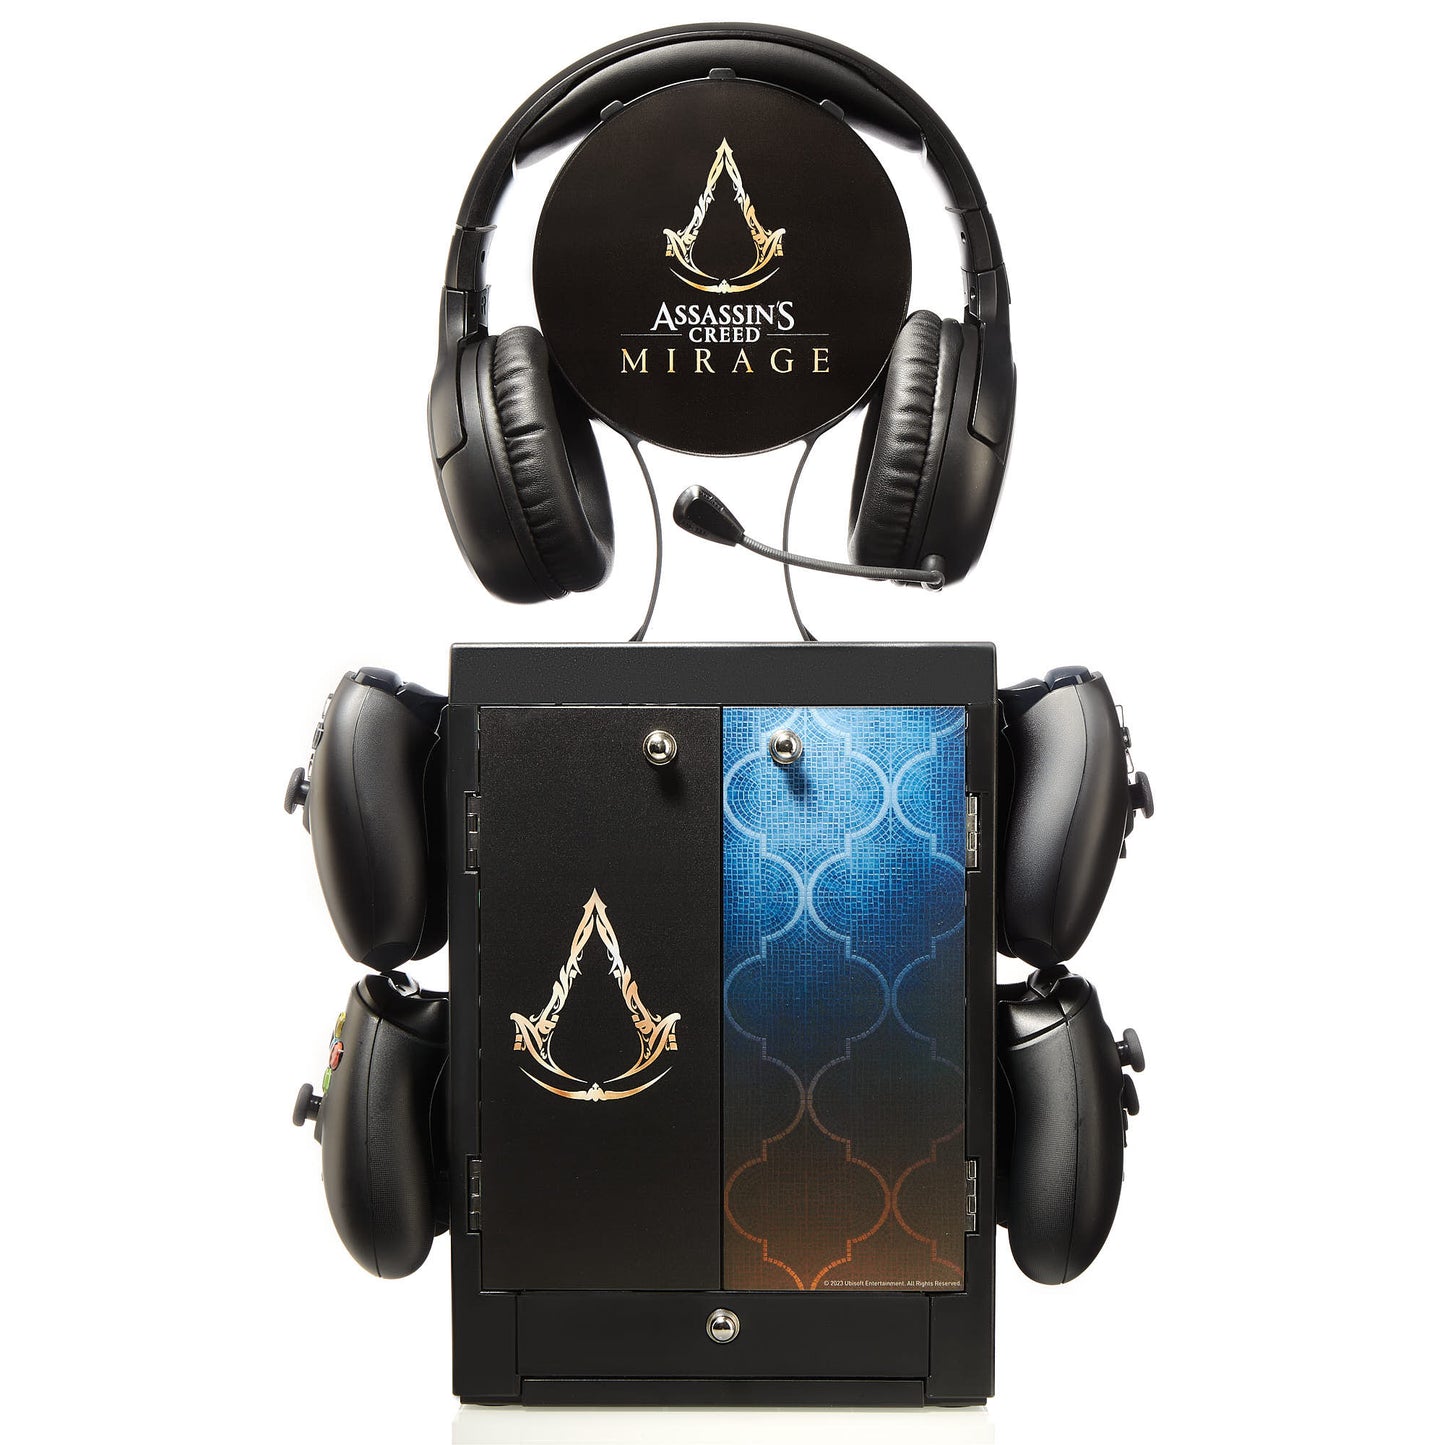 Assassin’s Creed Mirage Gaming Casier